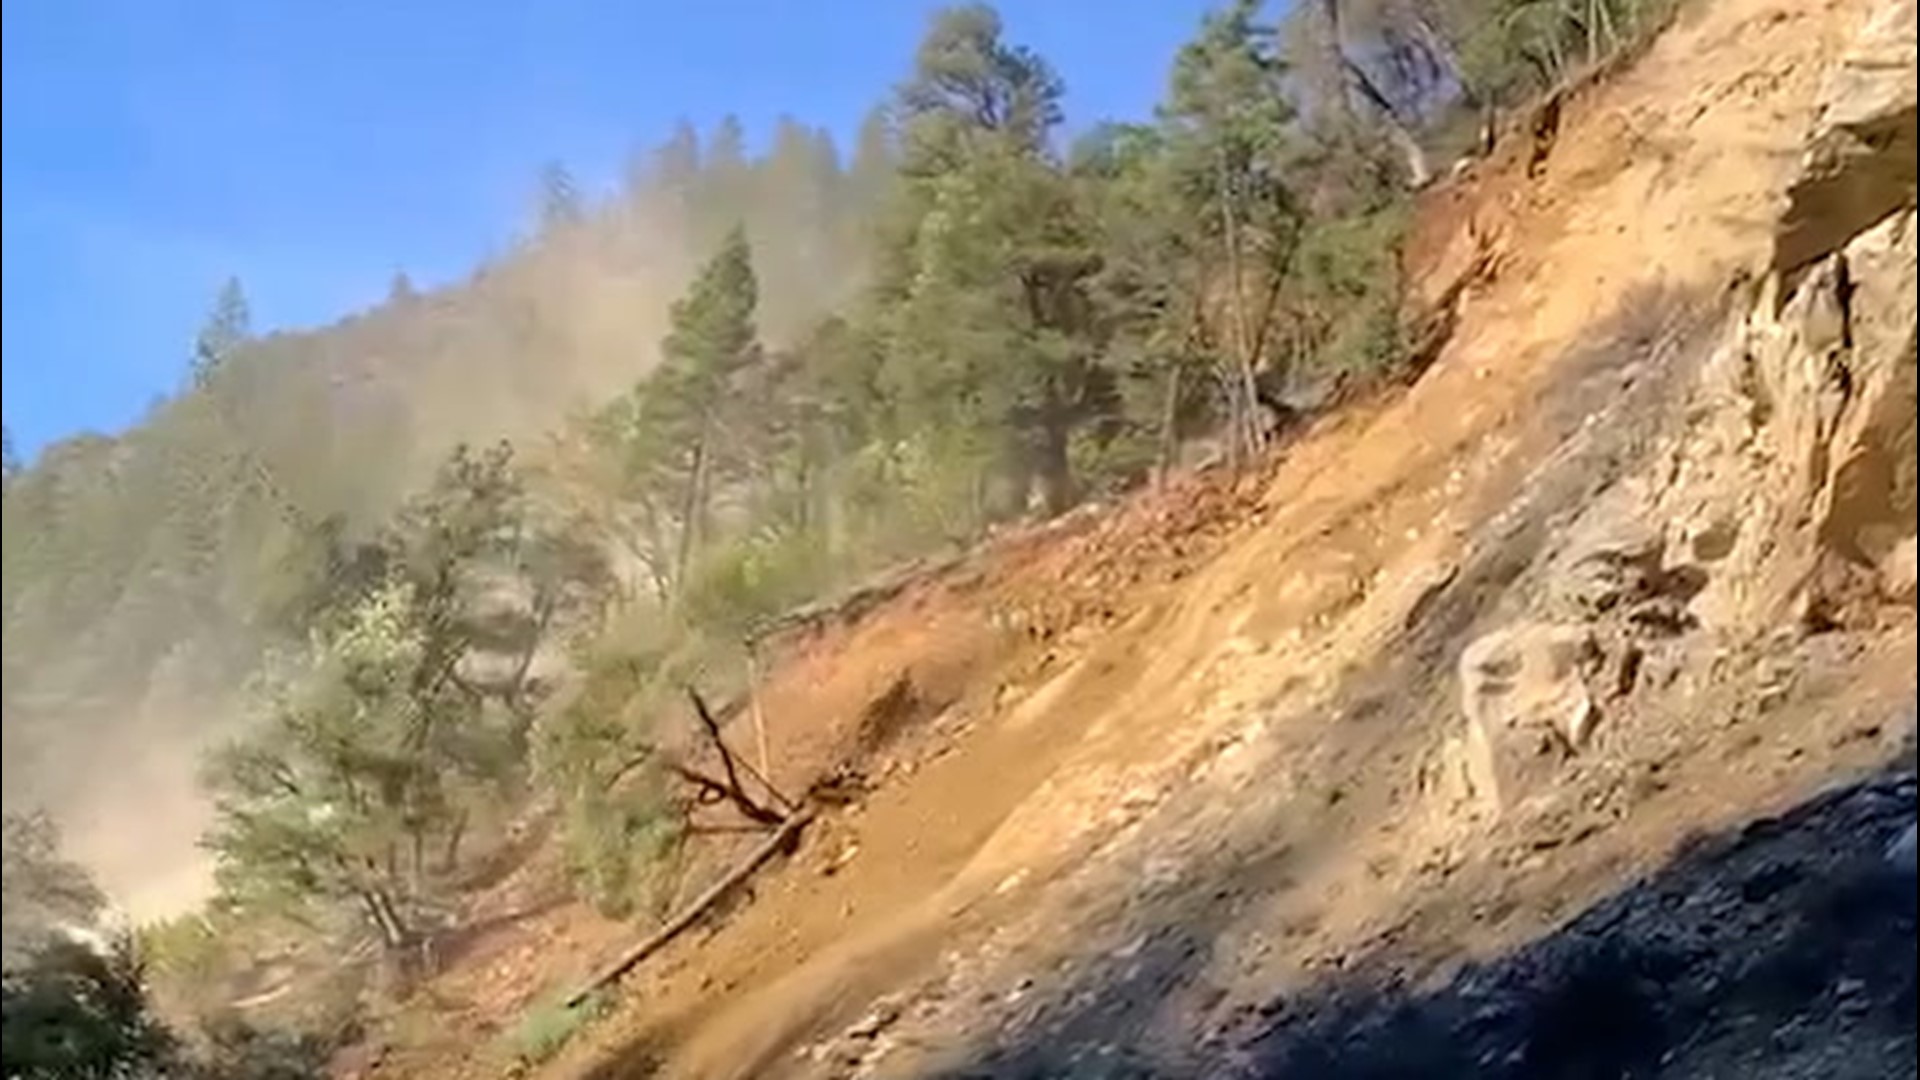 Transportation workers filmed this video on Jan. 20 of a landslide near Happy Camp, California, as an entire slope collapsed, sending debris onto Highway 96.